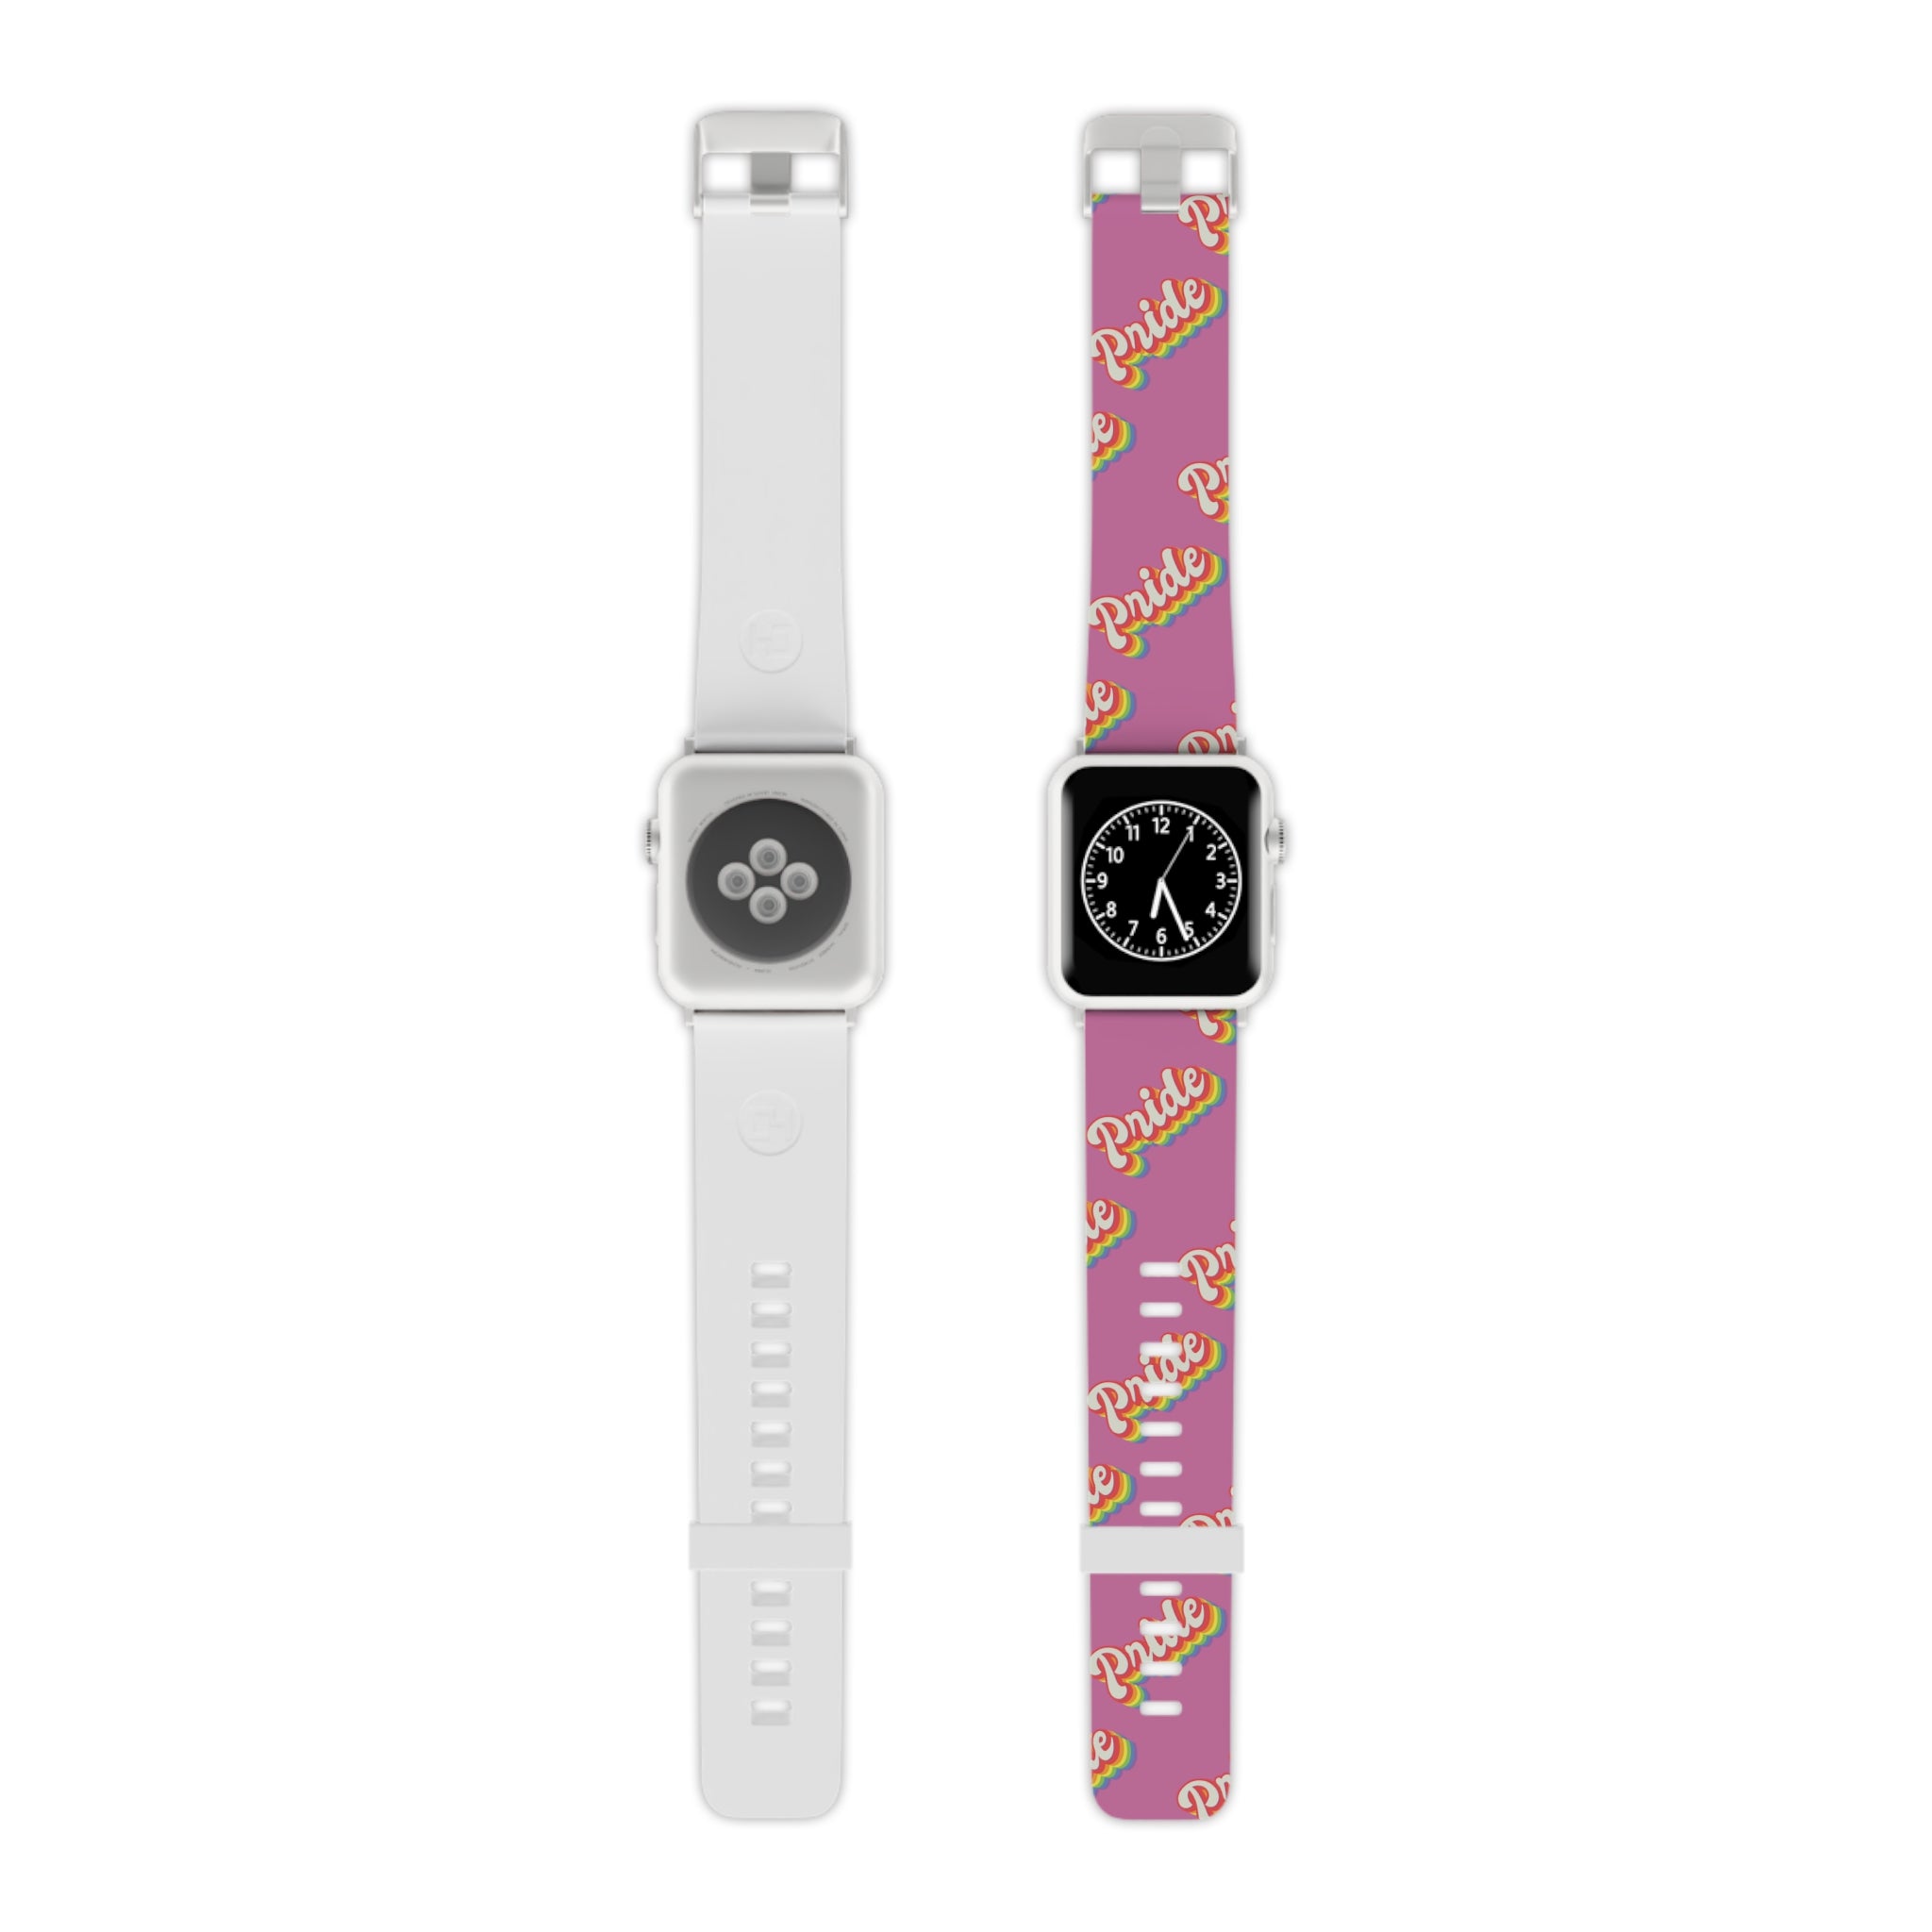 A fashionable alternative to the usual Pride Band for Apple Watch T-Shirt, this custom-printed pink and white strap features a stylish design.